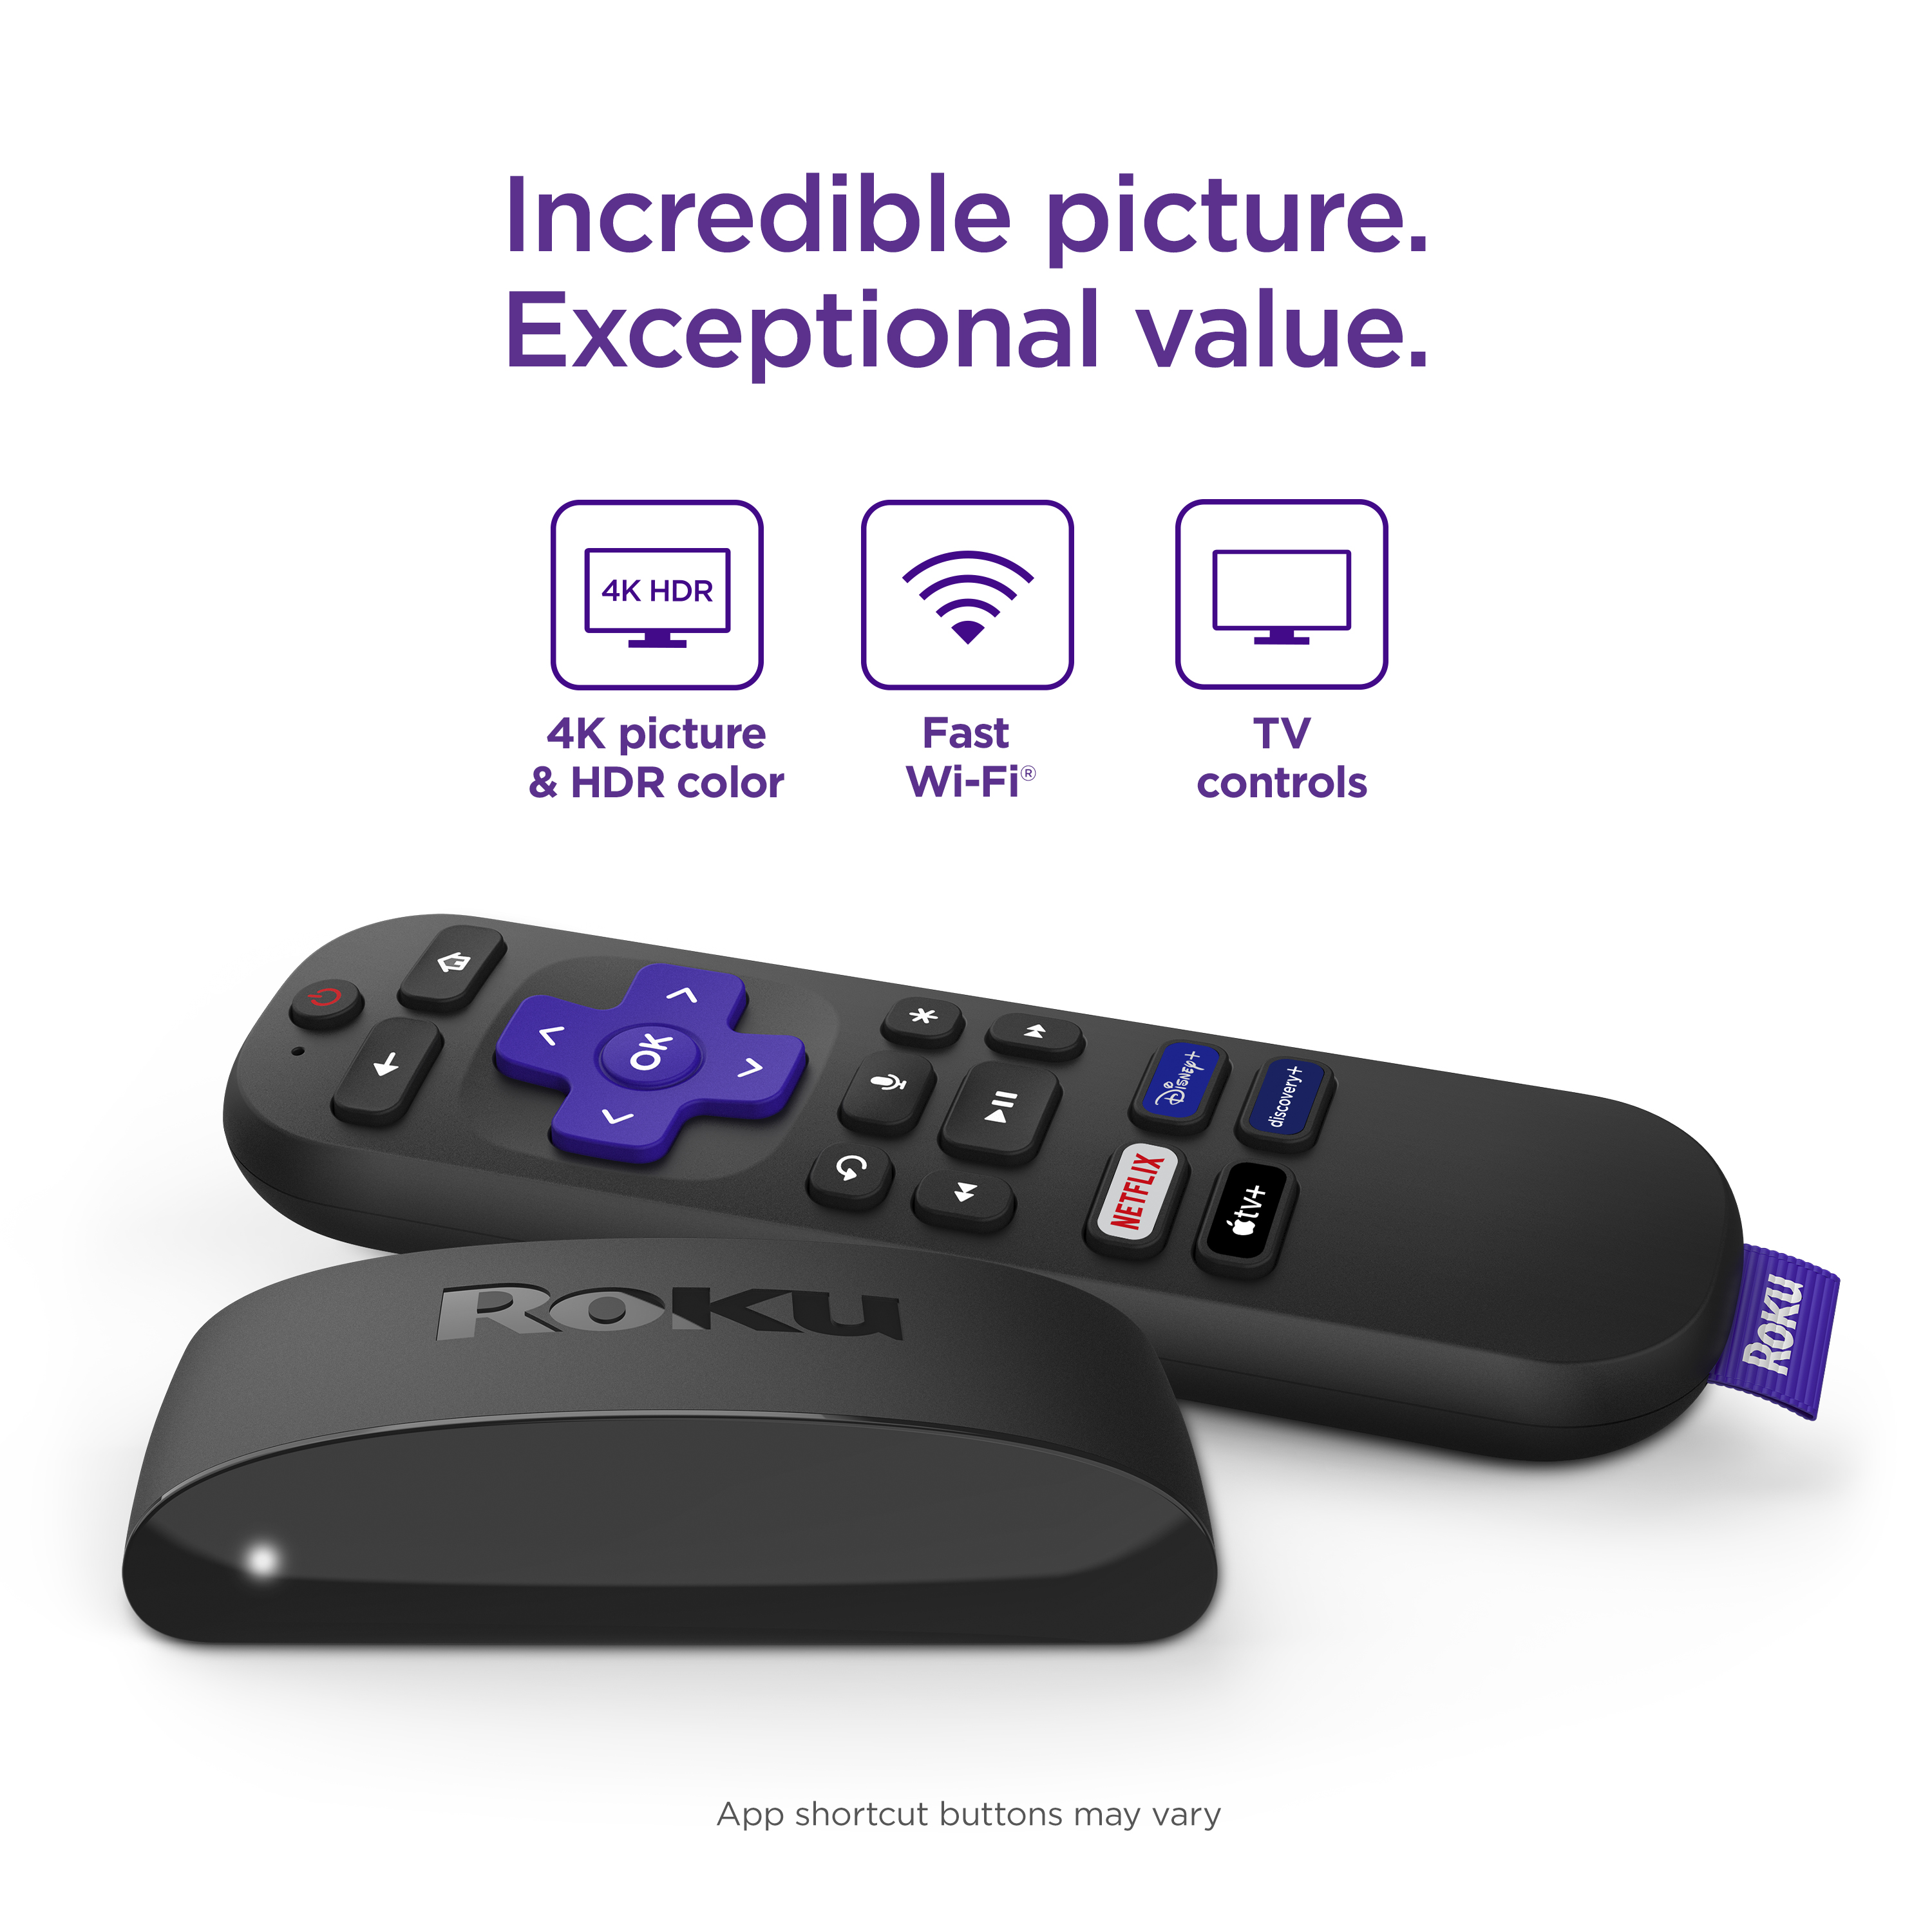 Roku Express 4K+ Streaming Player 4K/HD/HDR with Smooth Wi-Fi®, Premium  HDMI® Cable, Voice Remote